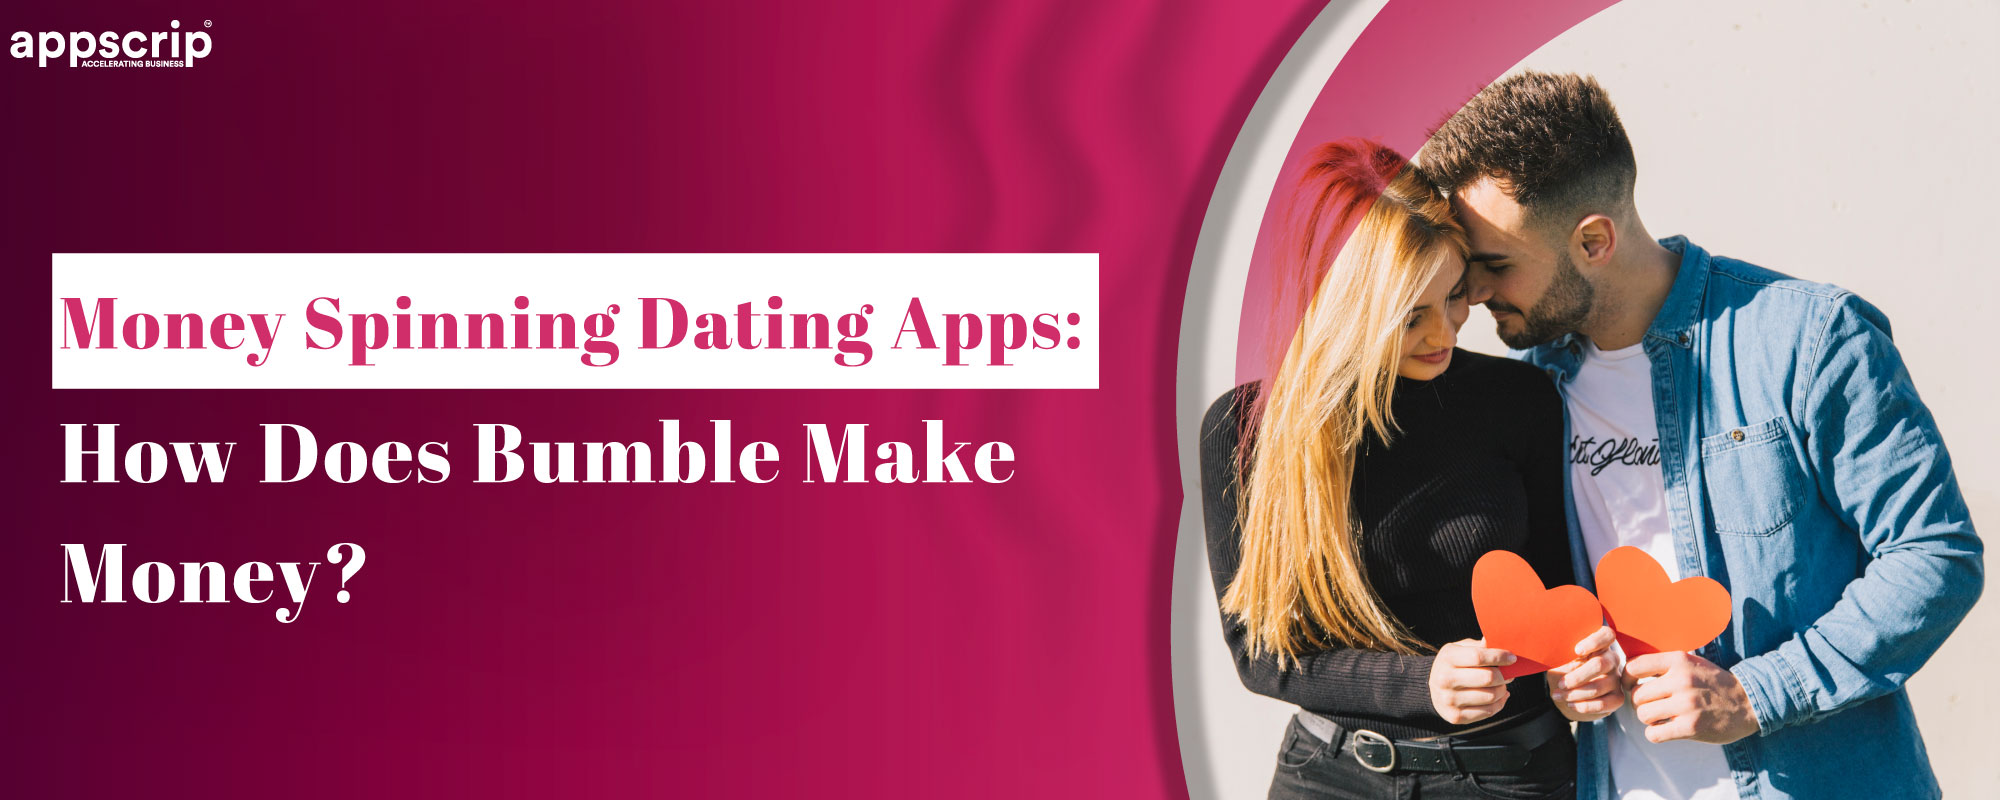 How does Bumble make money?